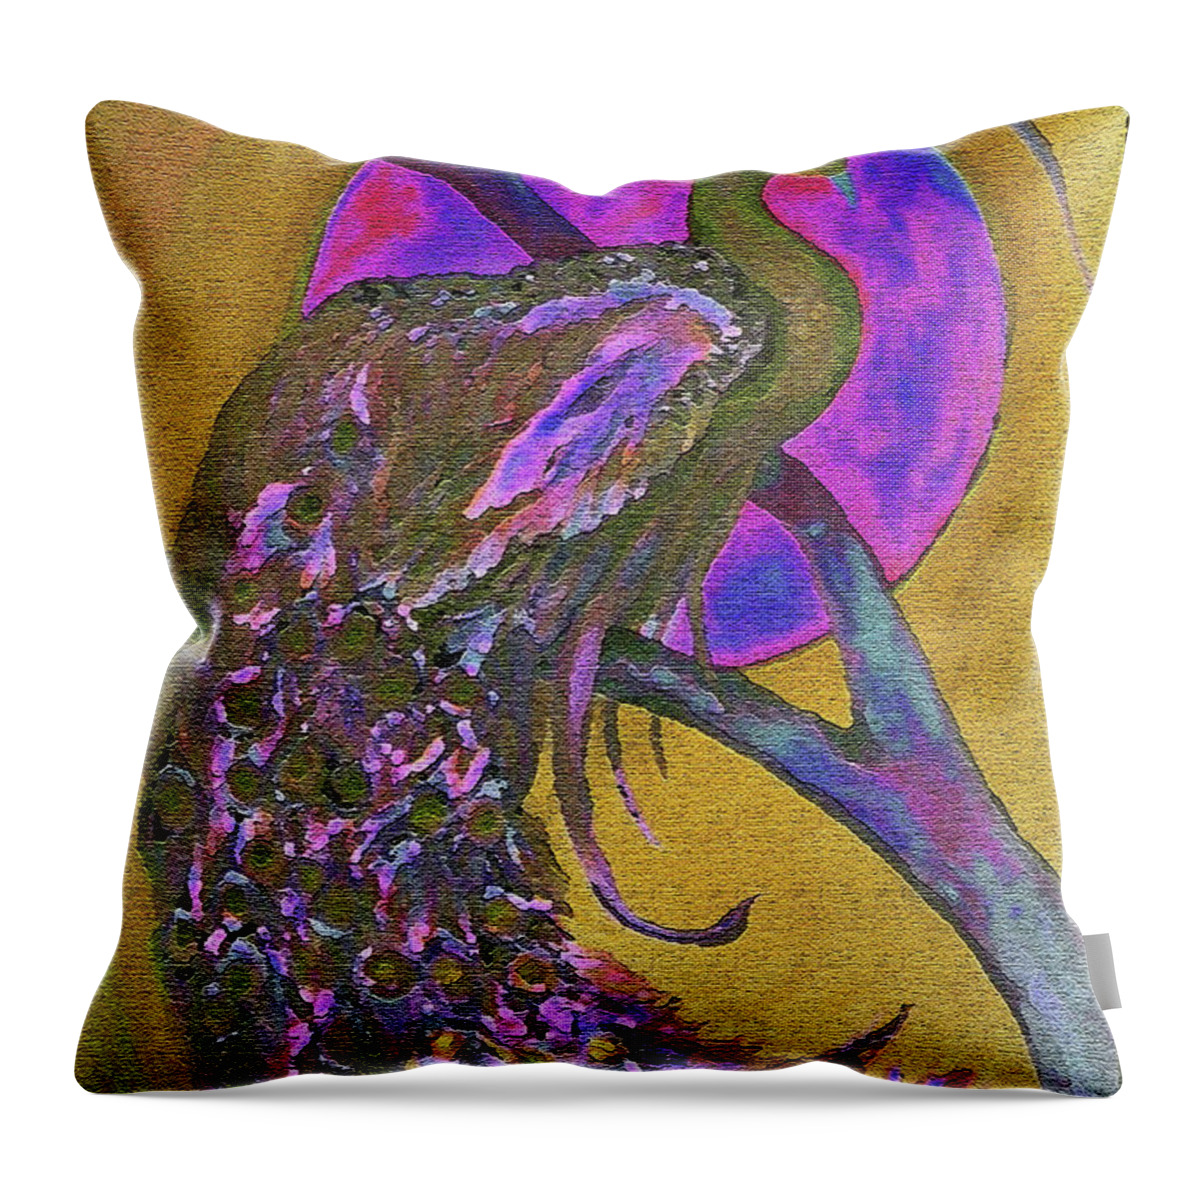 Pink And Blue Moon Throw Pillow featuring the painting Color Of Pink by Virginia Bond